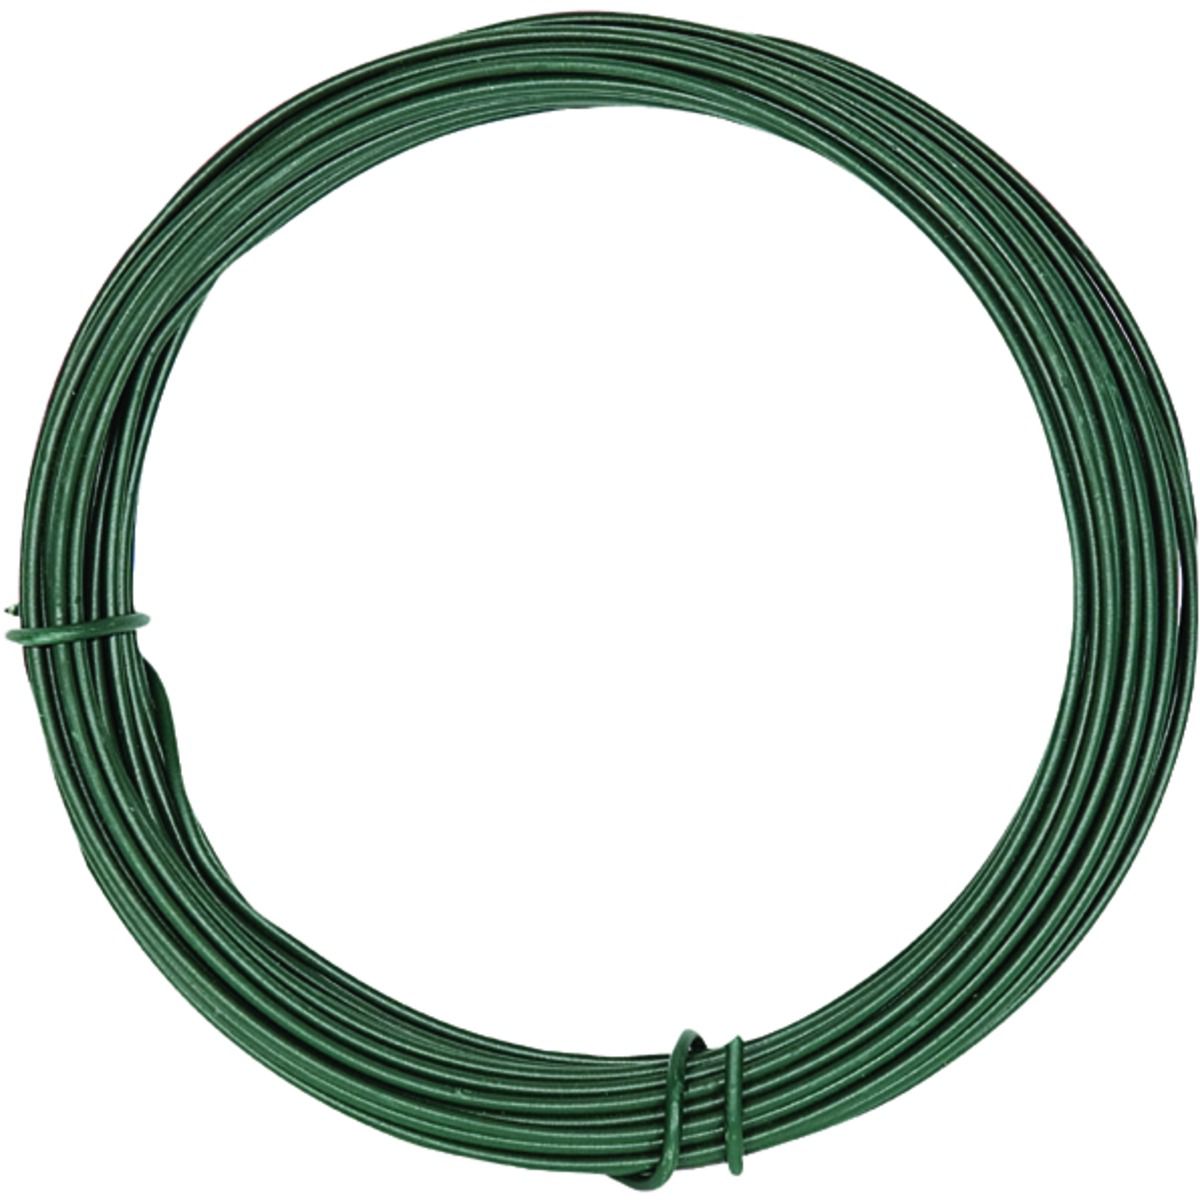 Image of Wickes PVC Coated Garden Wire - 3.5mm x 20m